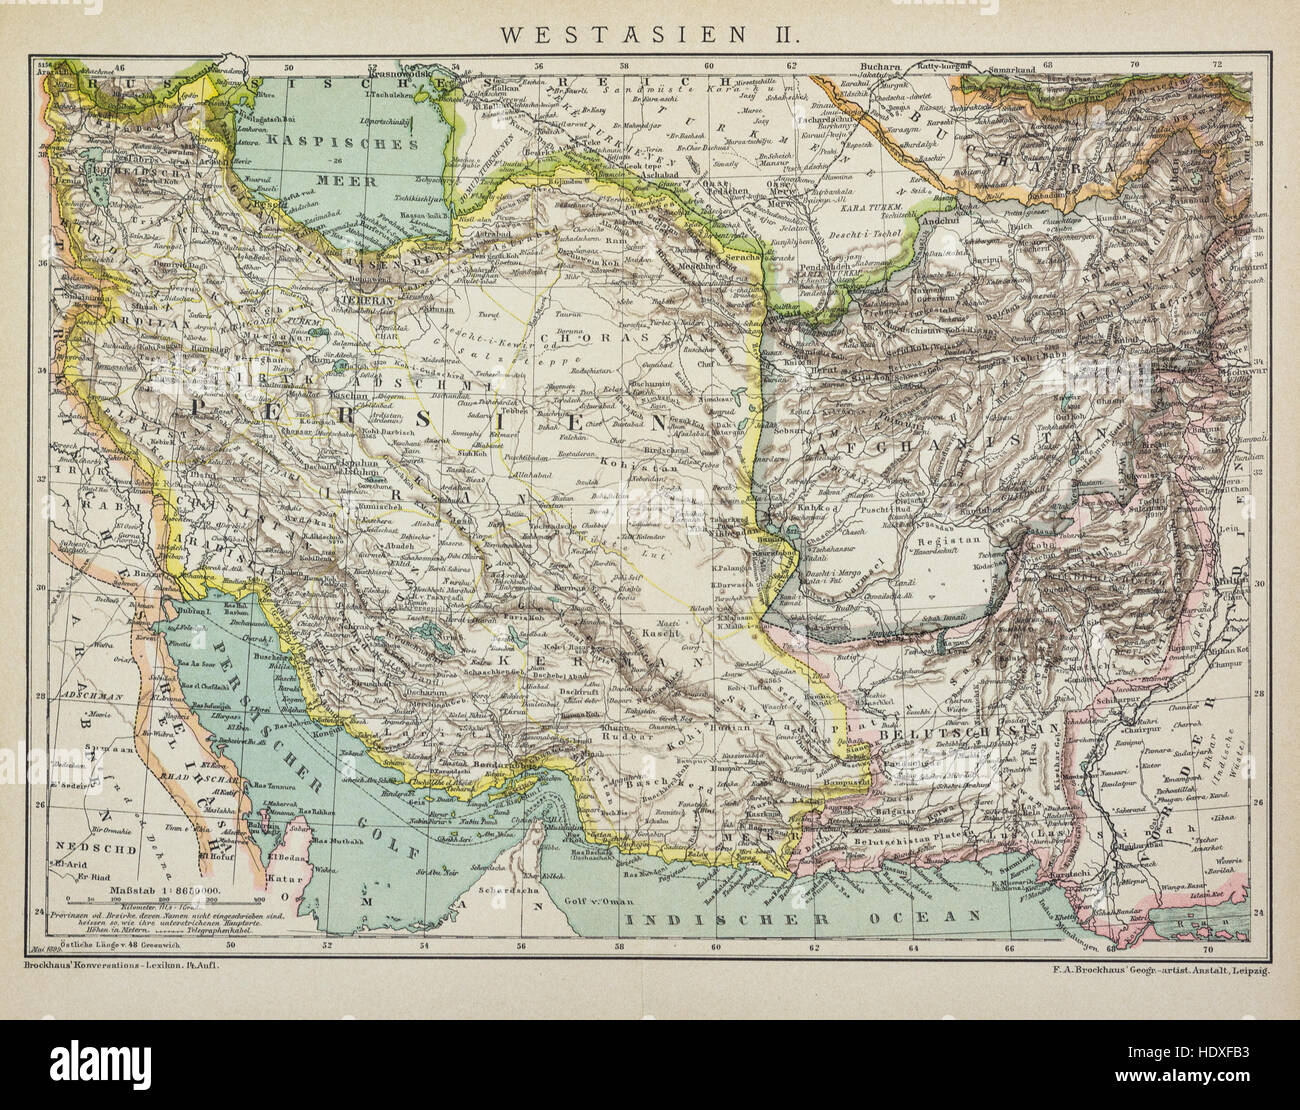 Old map of West Asia Stock Photo